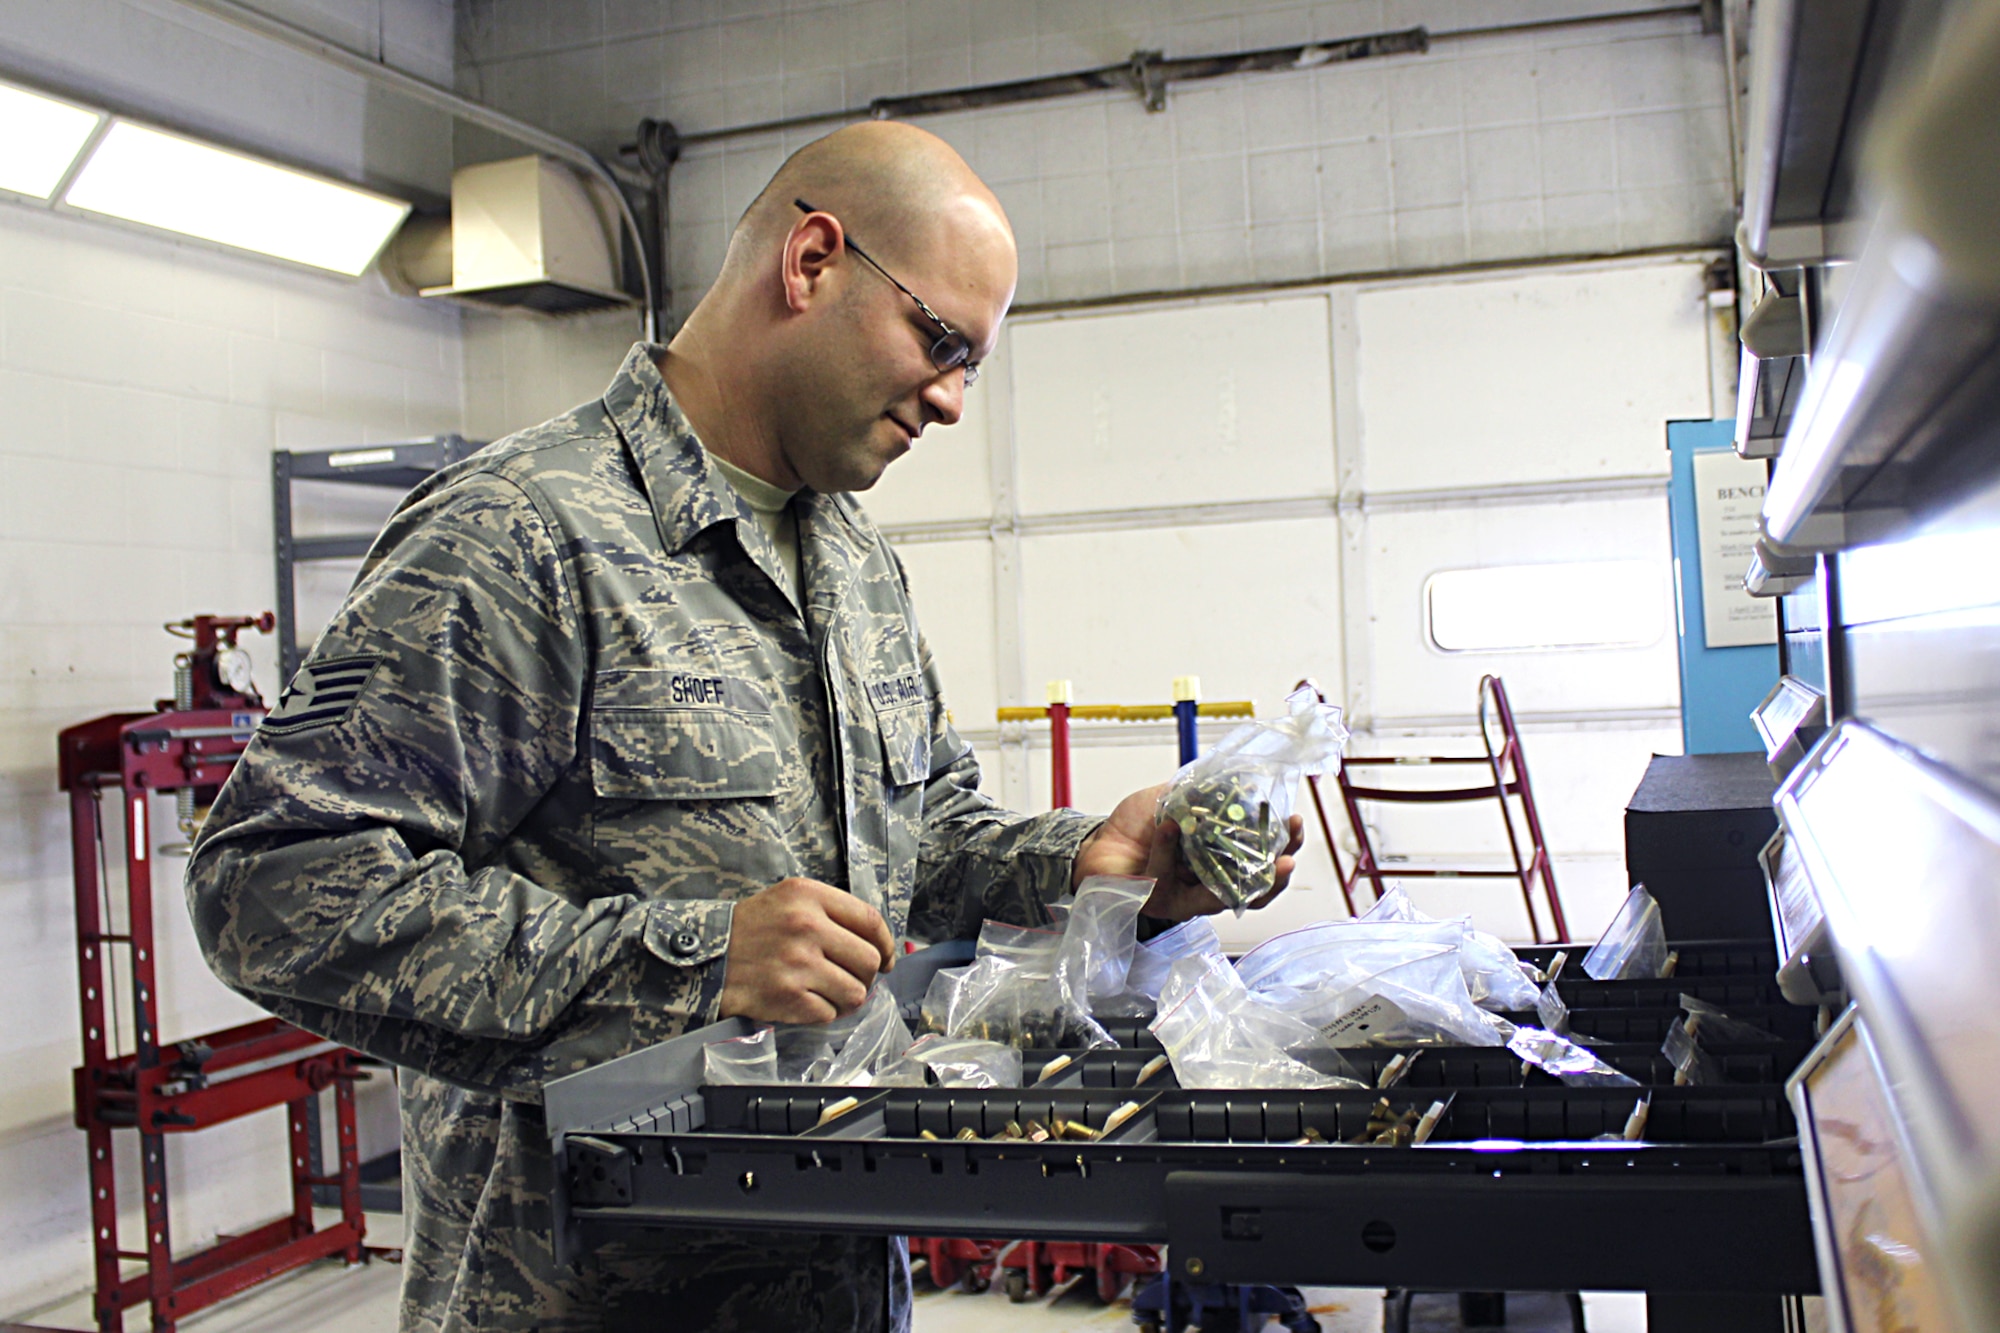 Staff Sgt. Michael Shoff works in the aerospace ground equipment shop -- known as "AGE" -- for the 191st Maintenance Squadron at Selfridge Air National Guard Base, Mich., Oct. 9, 2014. AGE specialists needs to be well-rounded mechanics as they maintain, repair and troubleshoot about two dozen different types of equipment used to support aircraft operations, including electronics, pneumatics, power generation, heating & cooling and more. The 191st MXS supports KC-135 Stratotanker operations at Selfridge. (U.S. Air National Guard photo by Tech. Sgt. Dan Heaton)